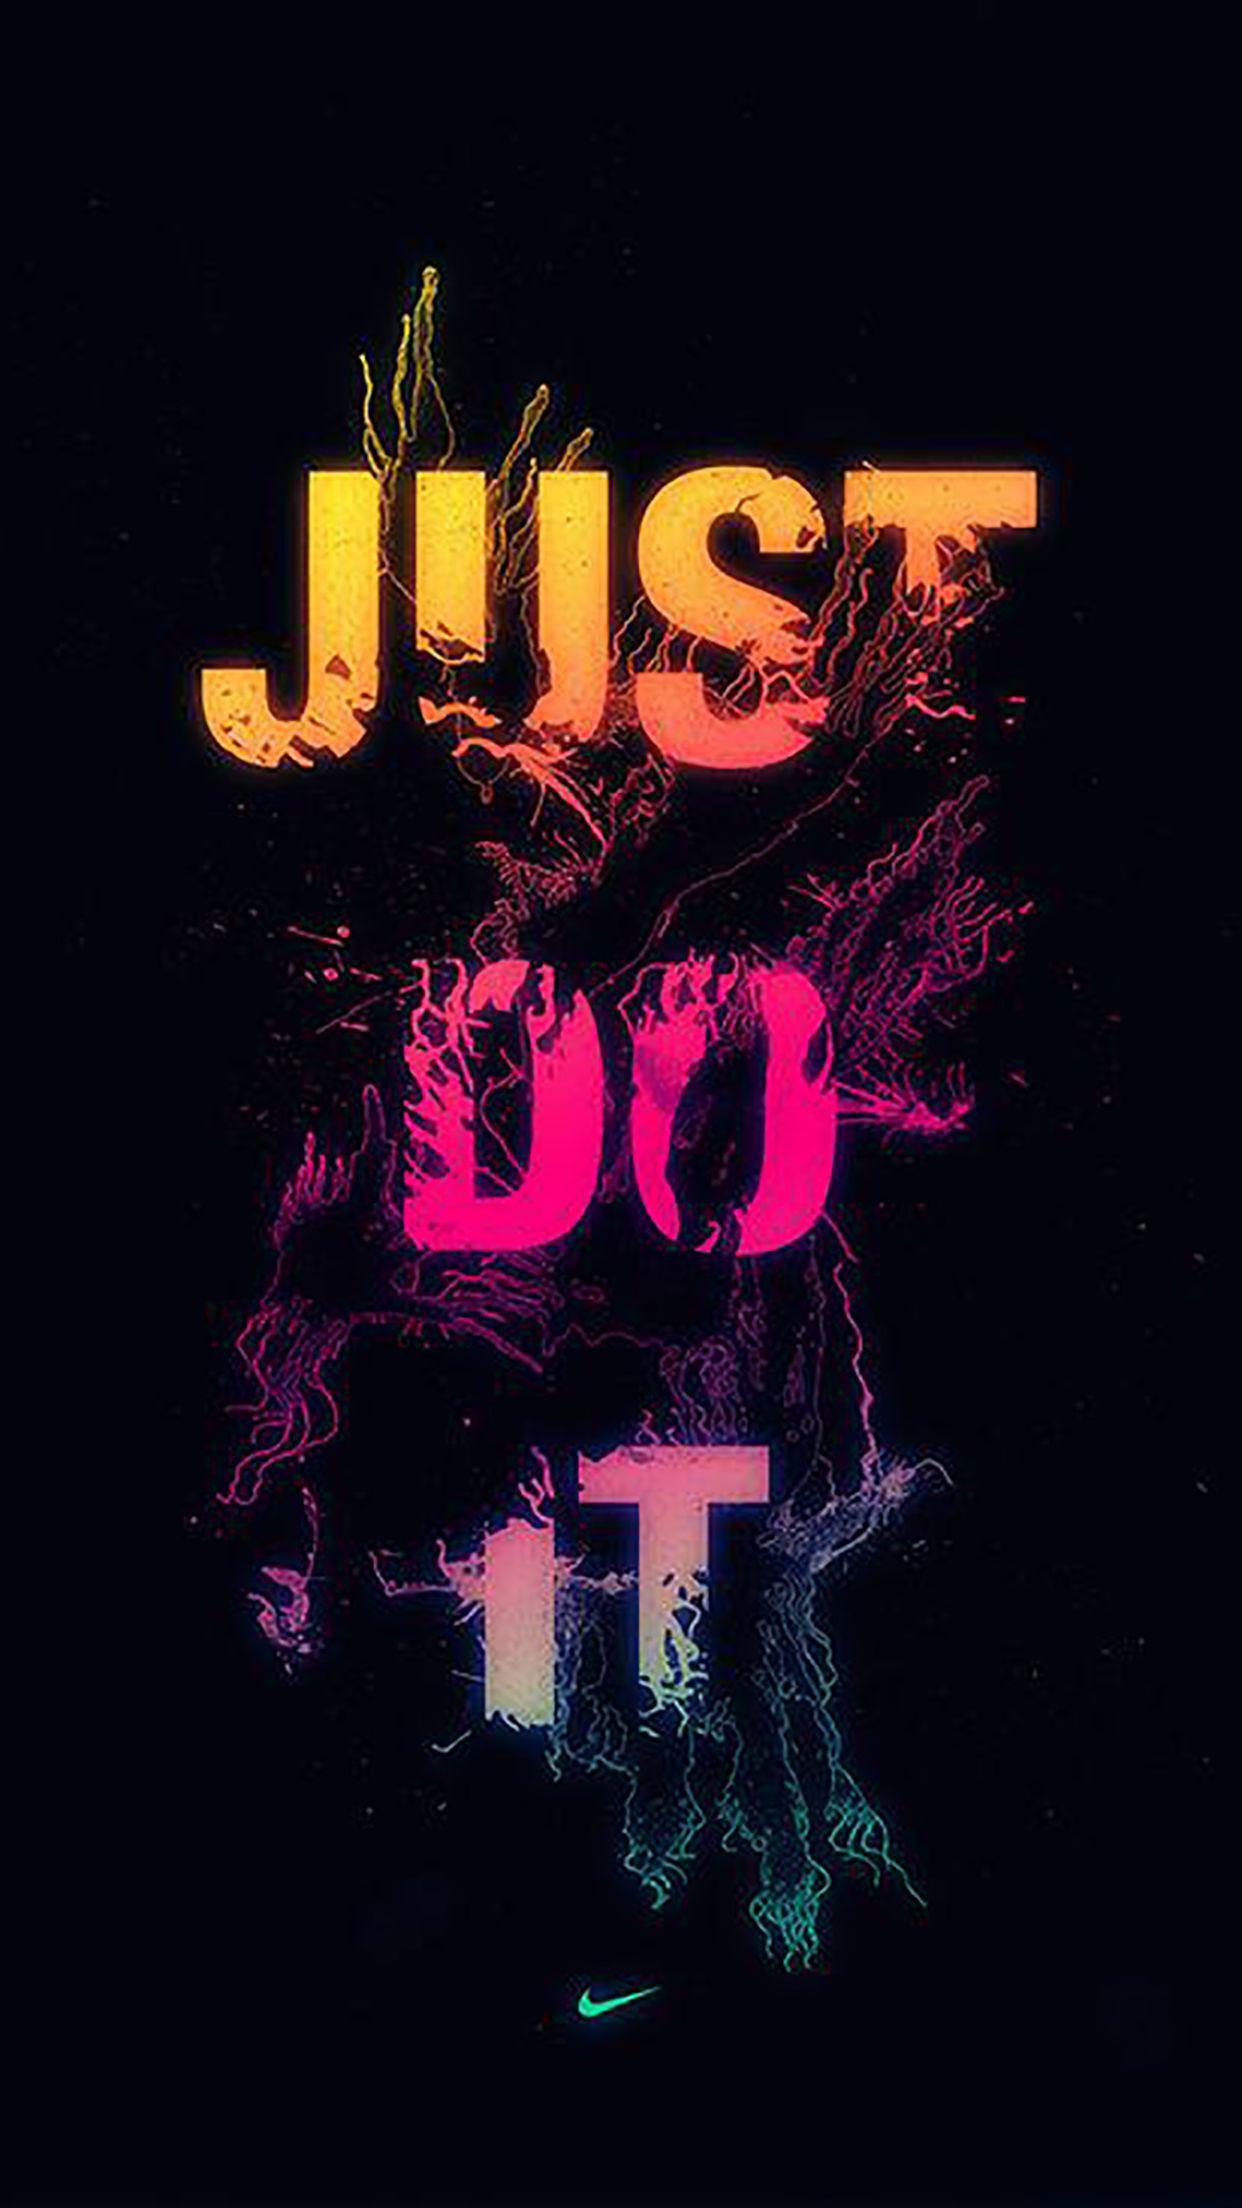 Just Do It Wallpapers Top Free Just Do It Backgrounds Wallpaperaccess